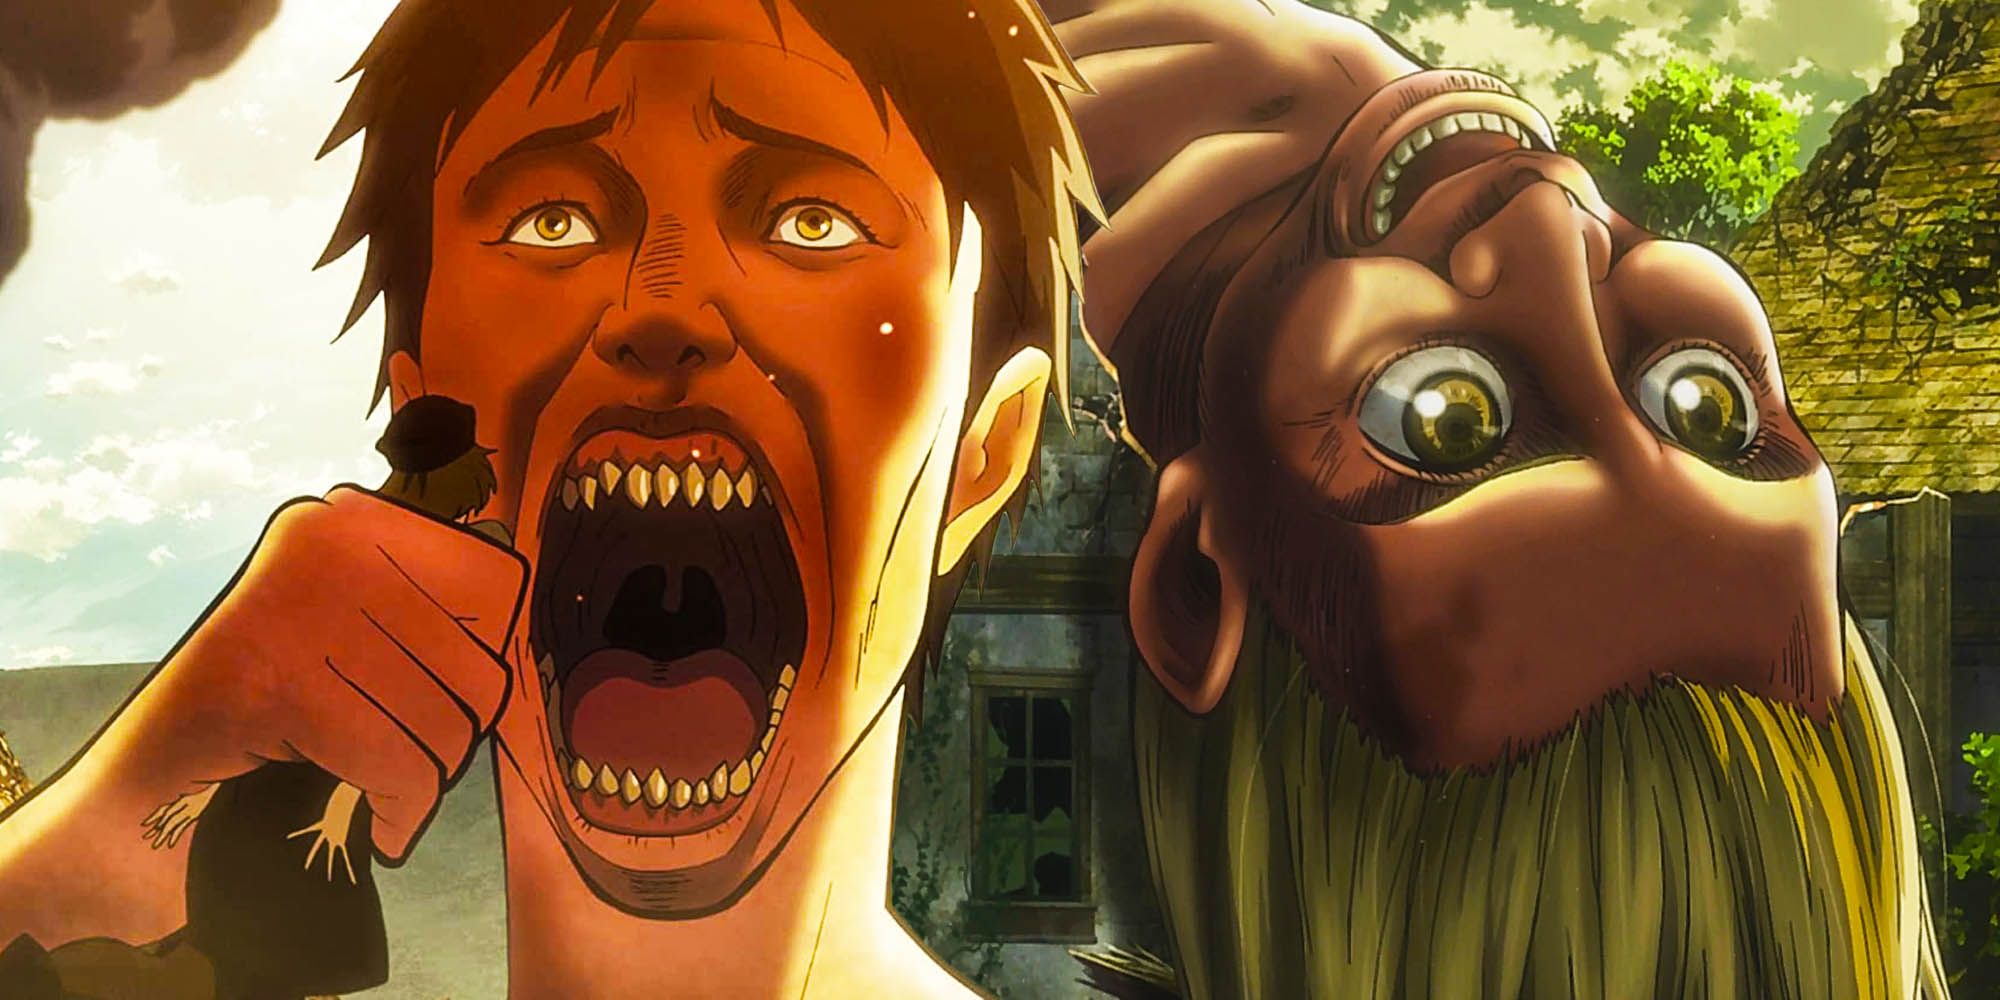 All Abnormal Titans in History Explained - Shingeki no Kyojin 